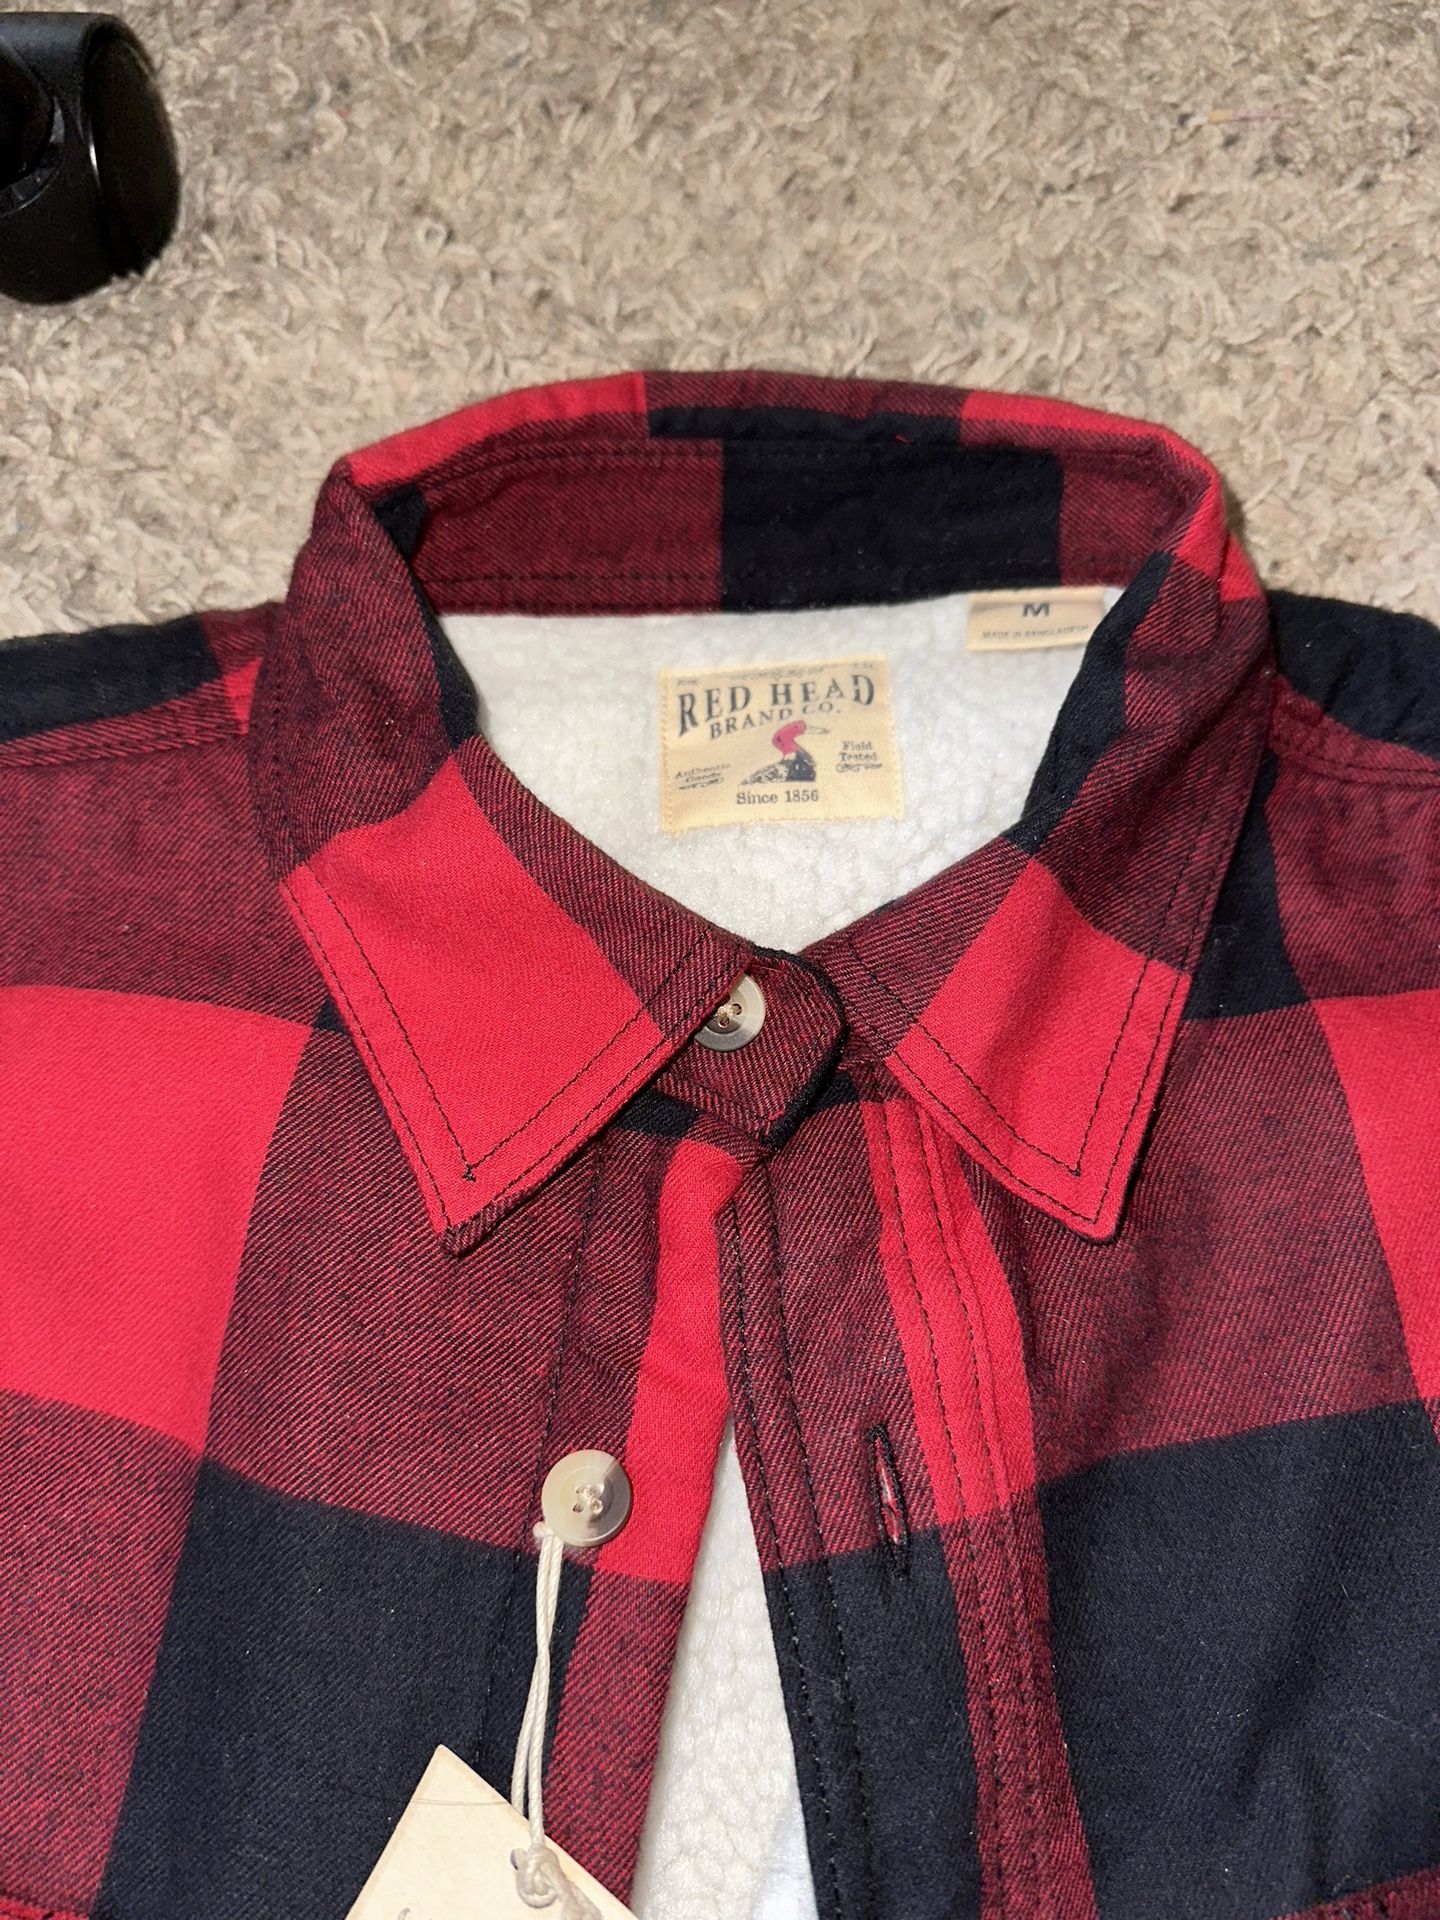 NEW RedHead Sherpa-Lined Plaid Long-Sleeve Shirt for Men (M)